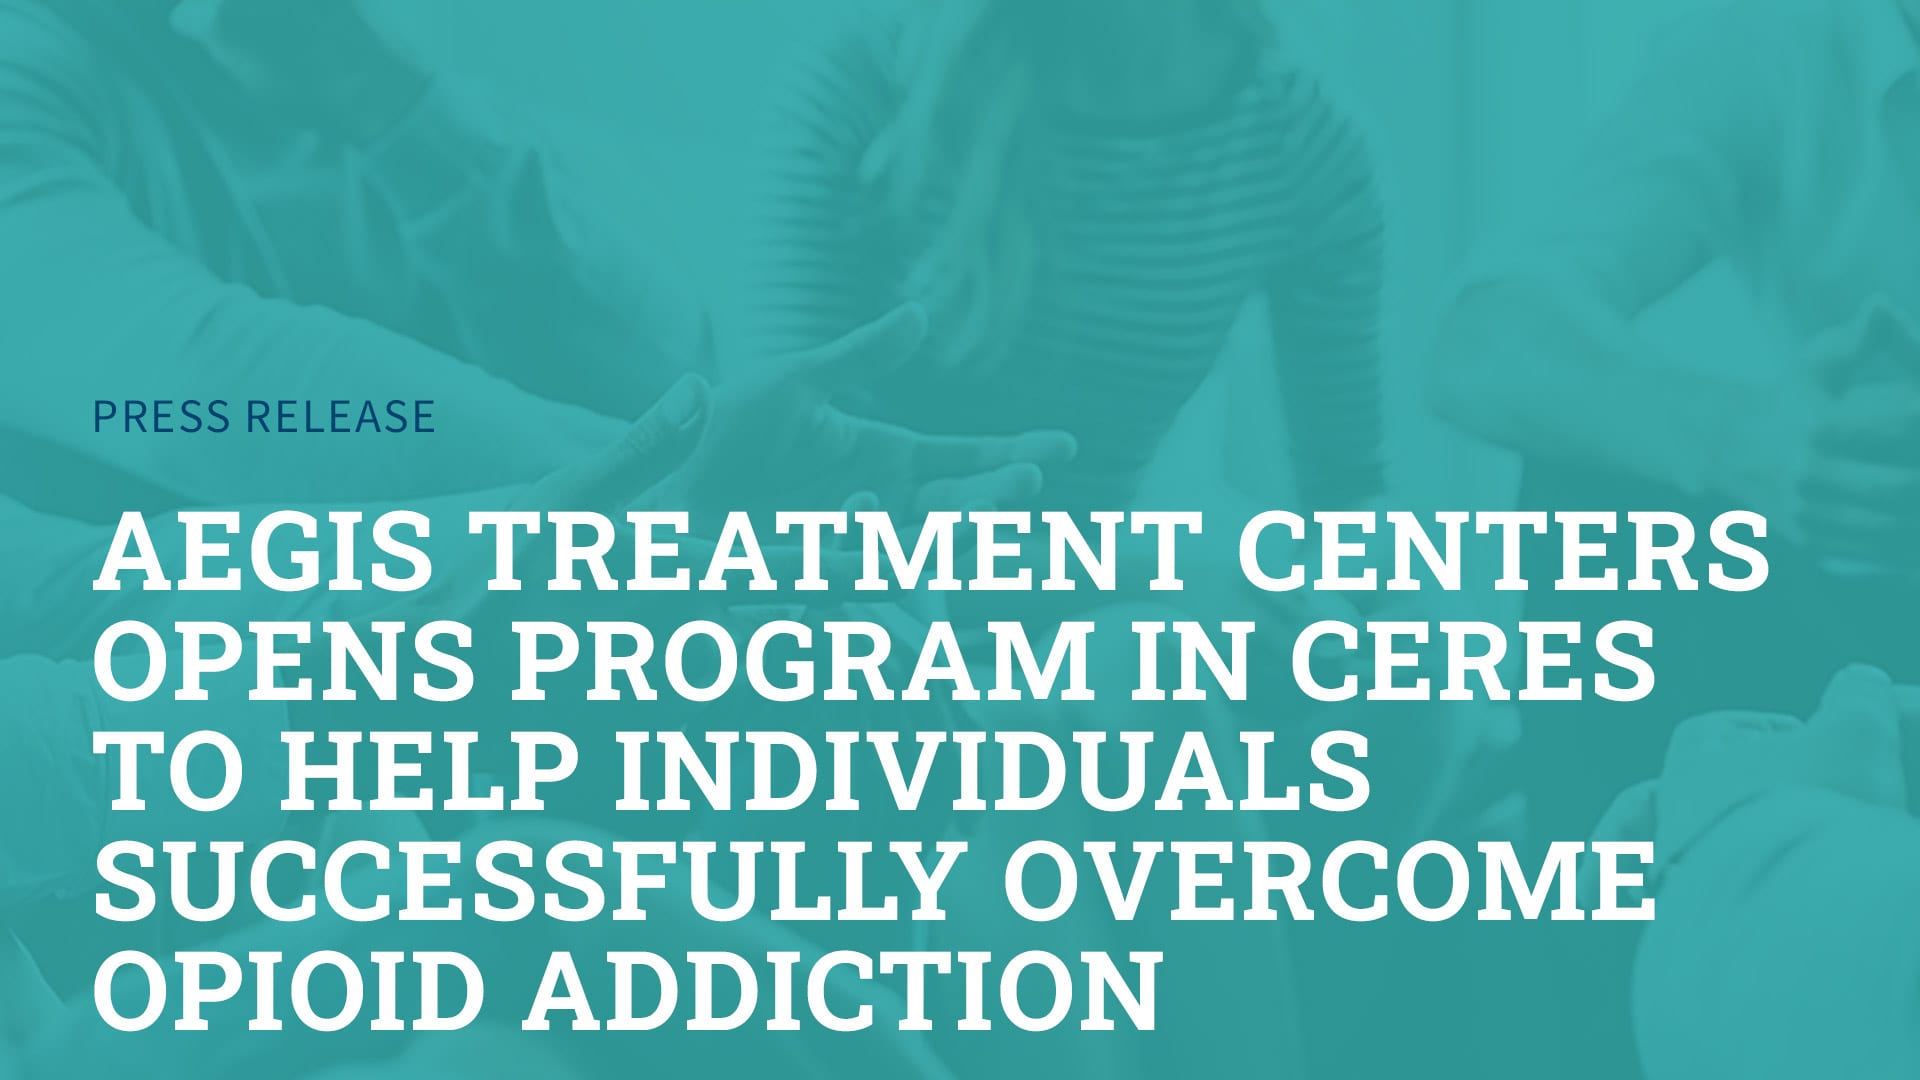 Aegis Treatment Centers Opens Program in Ceres to Help Individuals Successfully Overcome Opioid Addiction